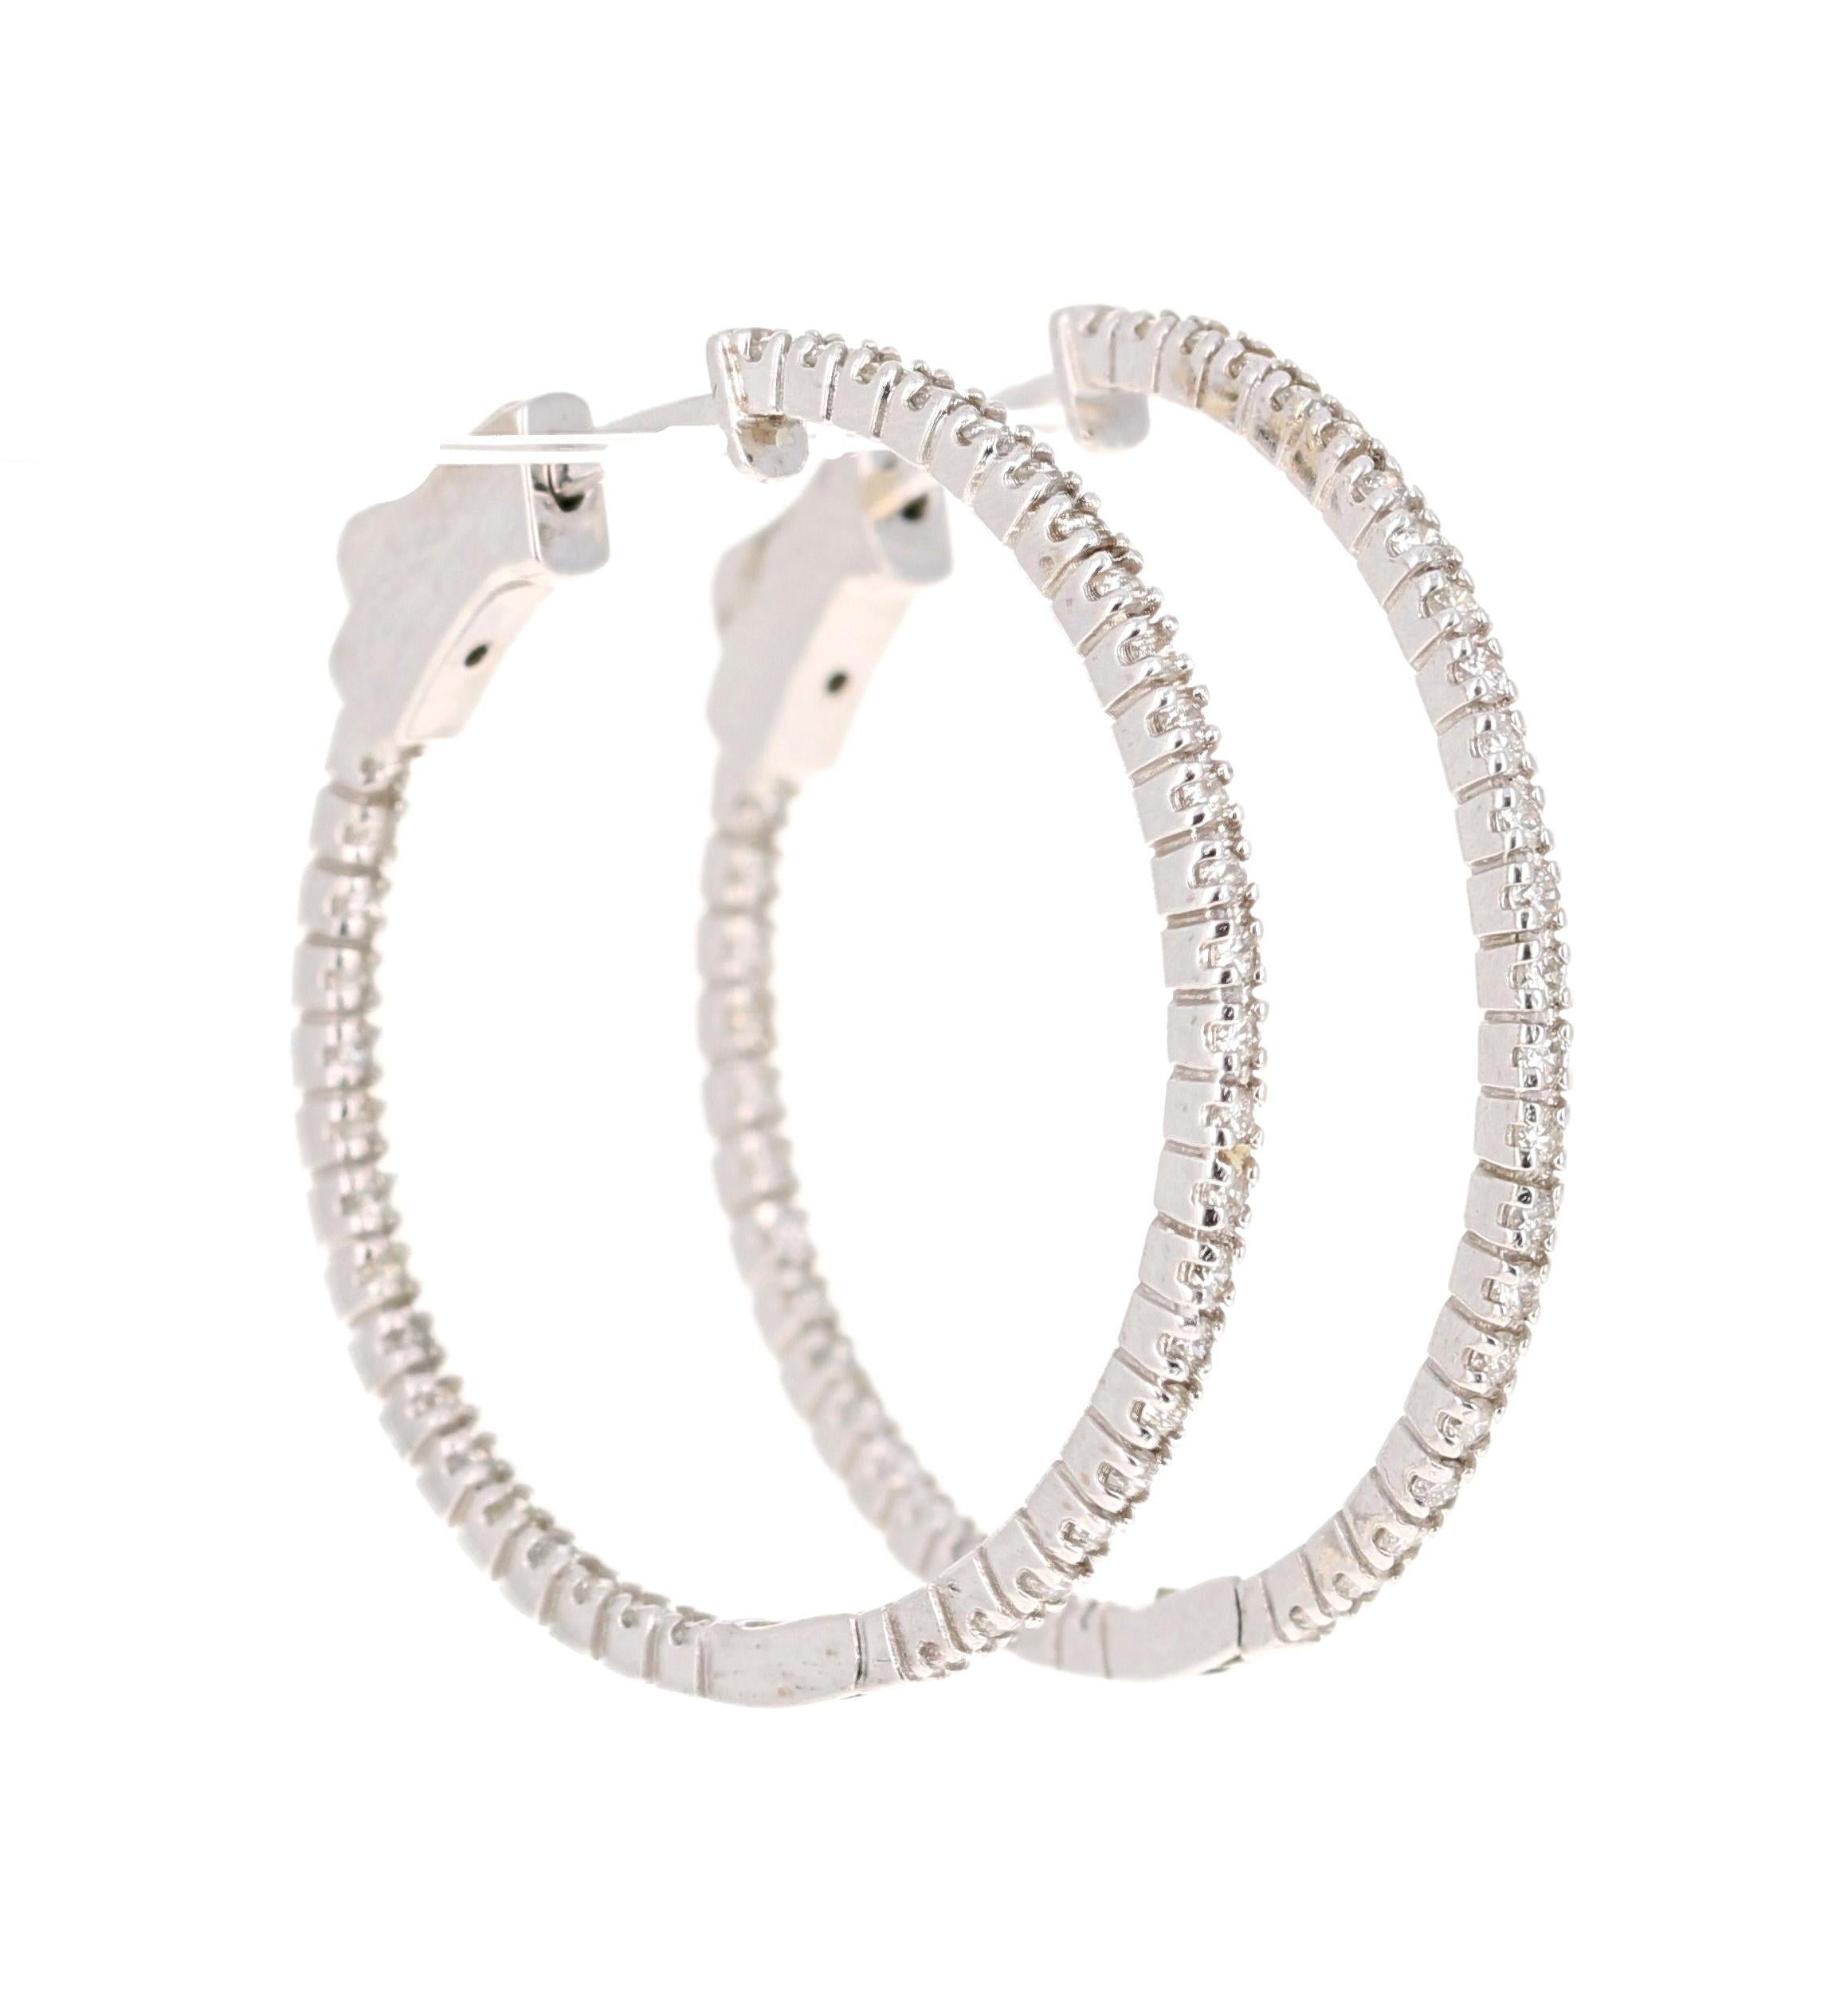 These beautiful and simple earrings are 80 Round Cut Diamonds that weigh 0.70 Carats. 

The hoops are set in 14 Karat White Gold and weigh approximately 4.6 grams. 

The hoops are 1.25 inches.